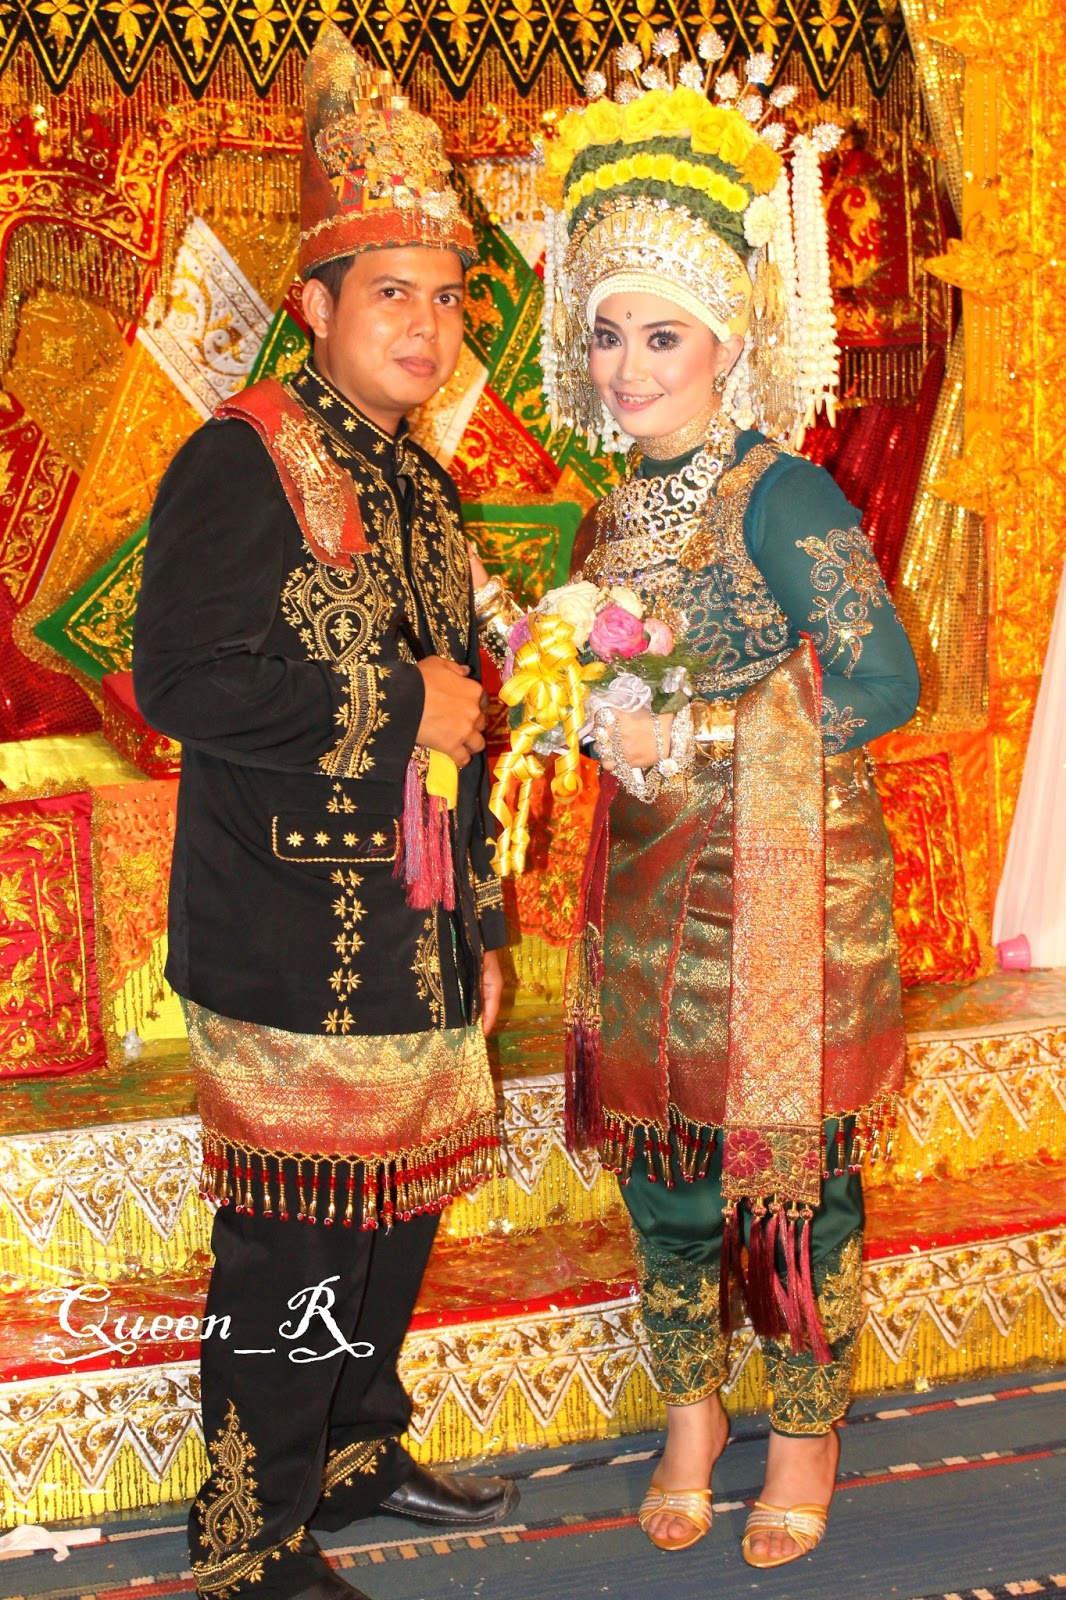 Queen_R: Acehnese Culture Marriage